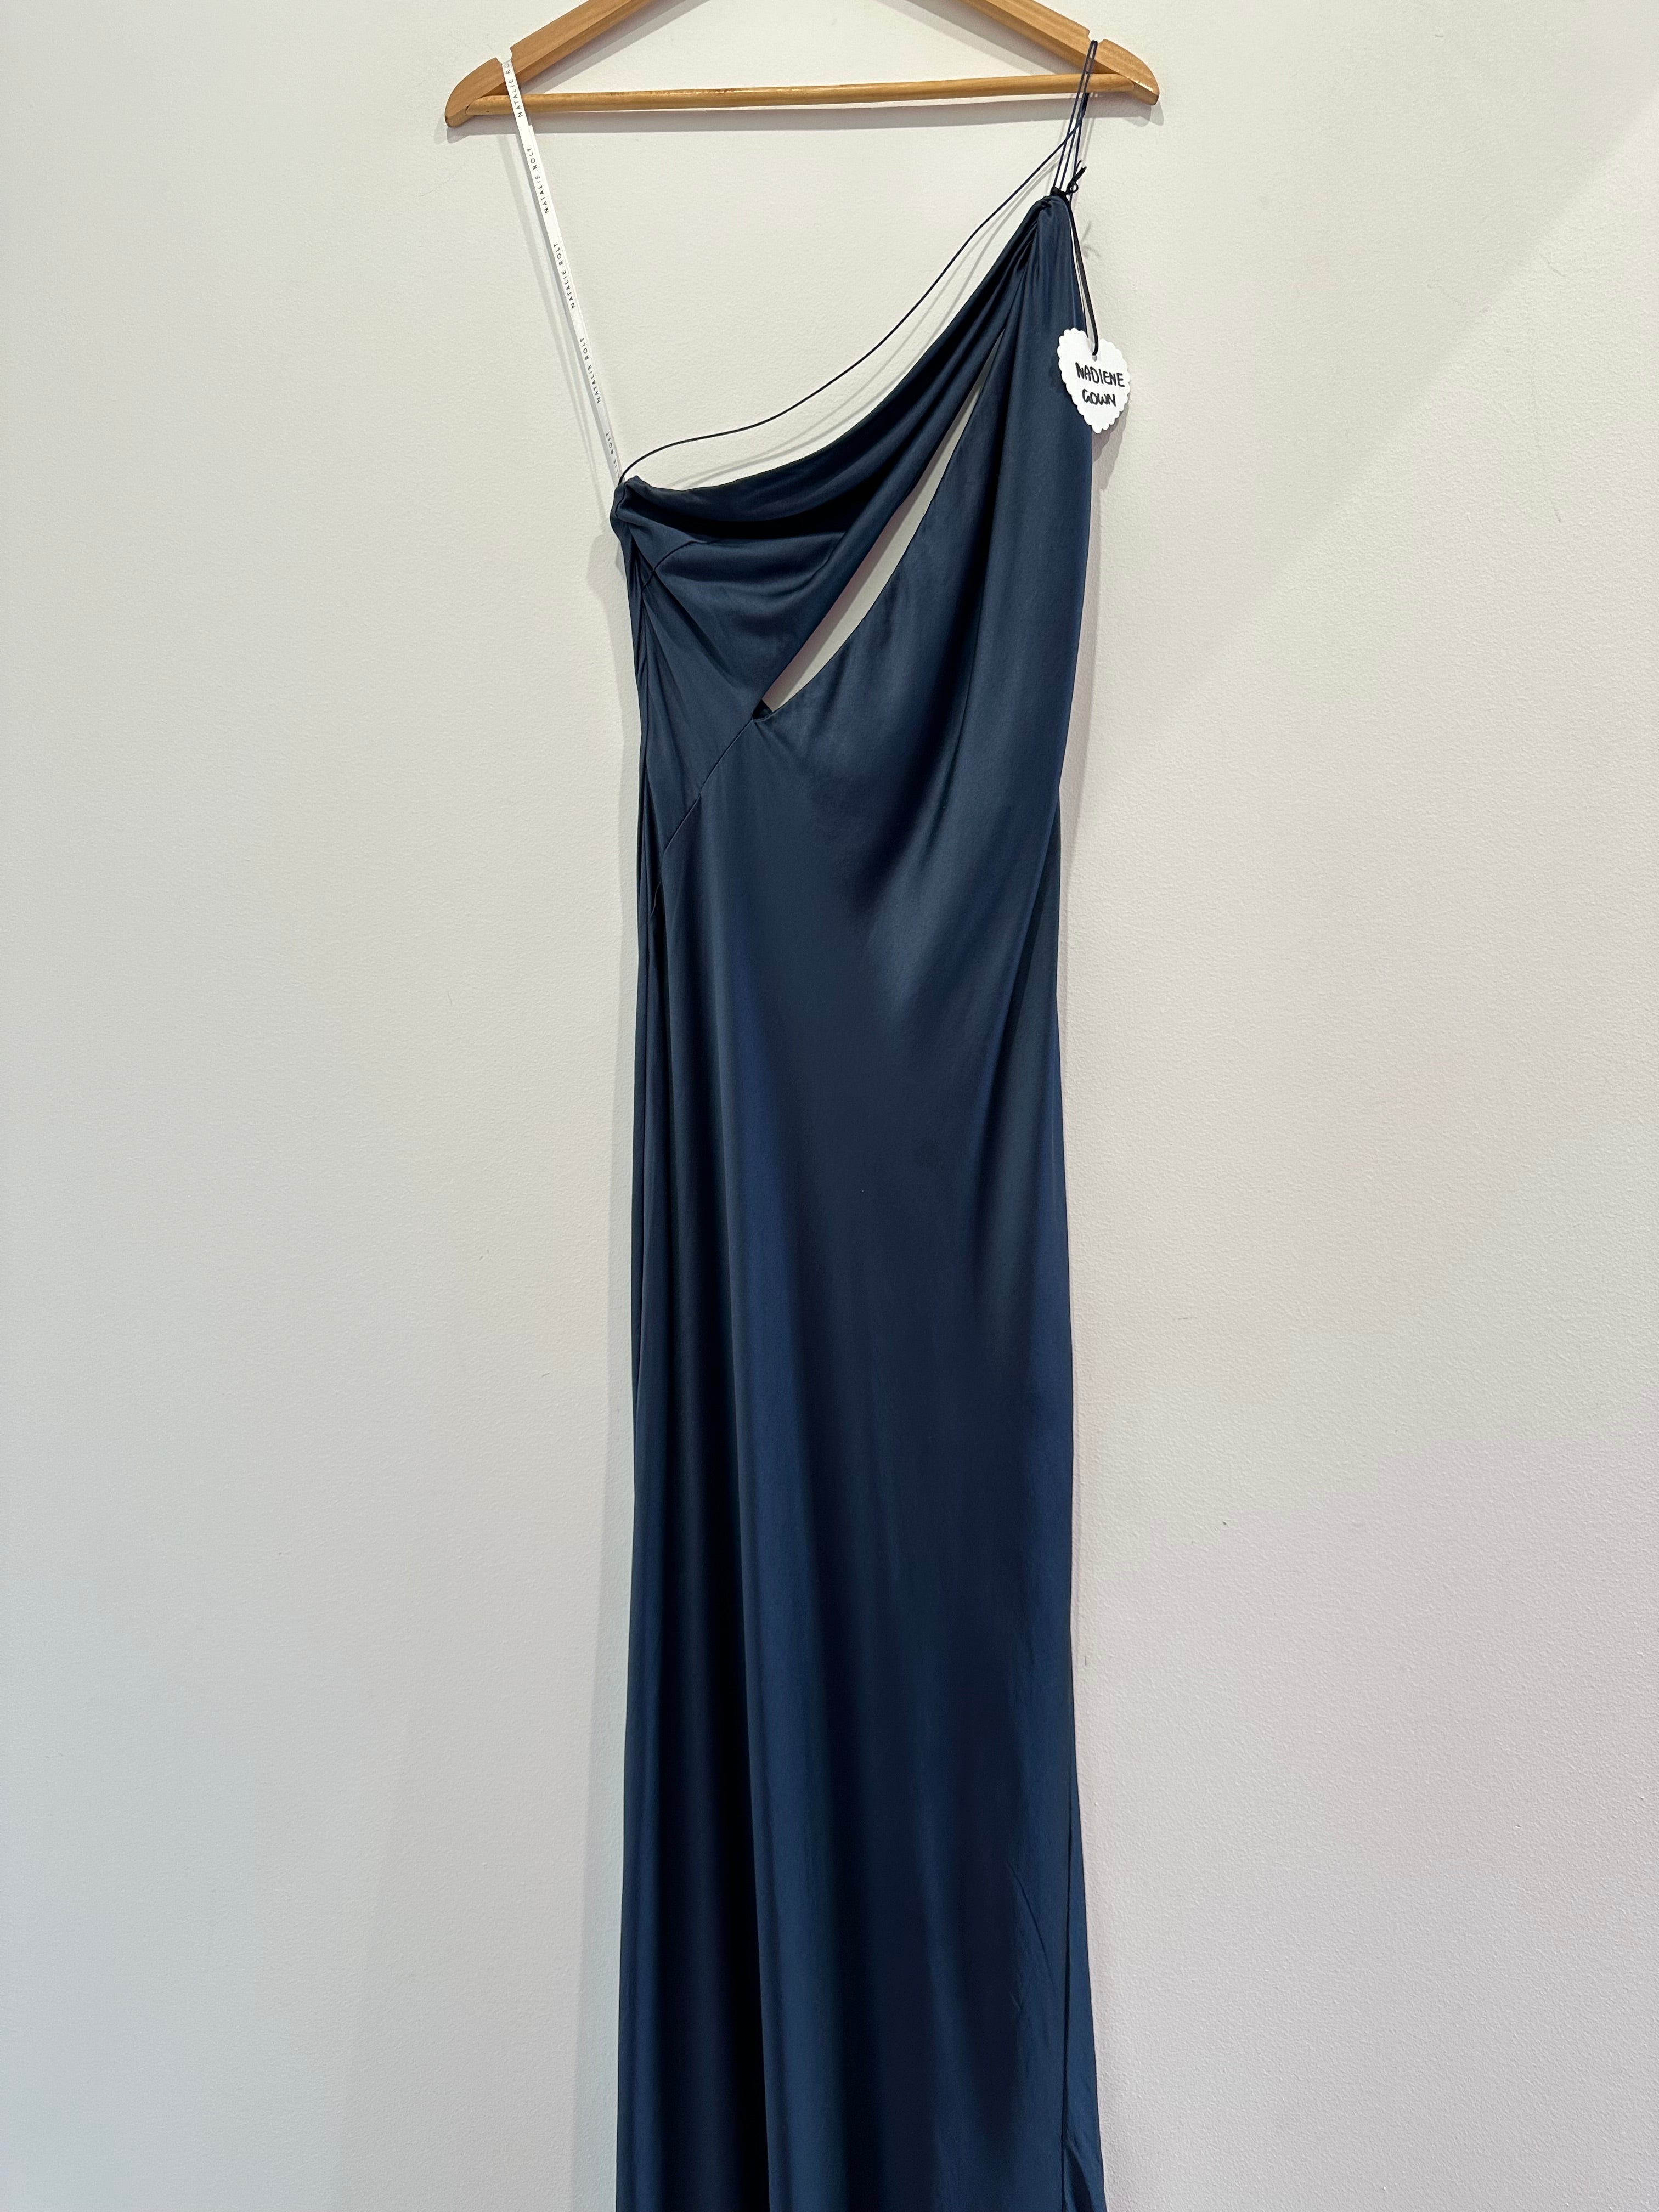 Nadiene Gown - FOR SALE